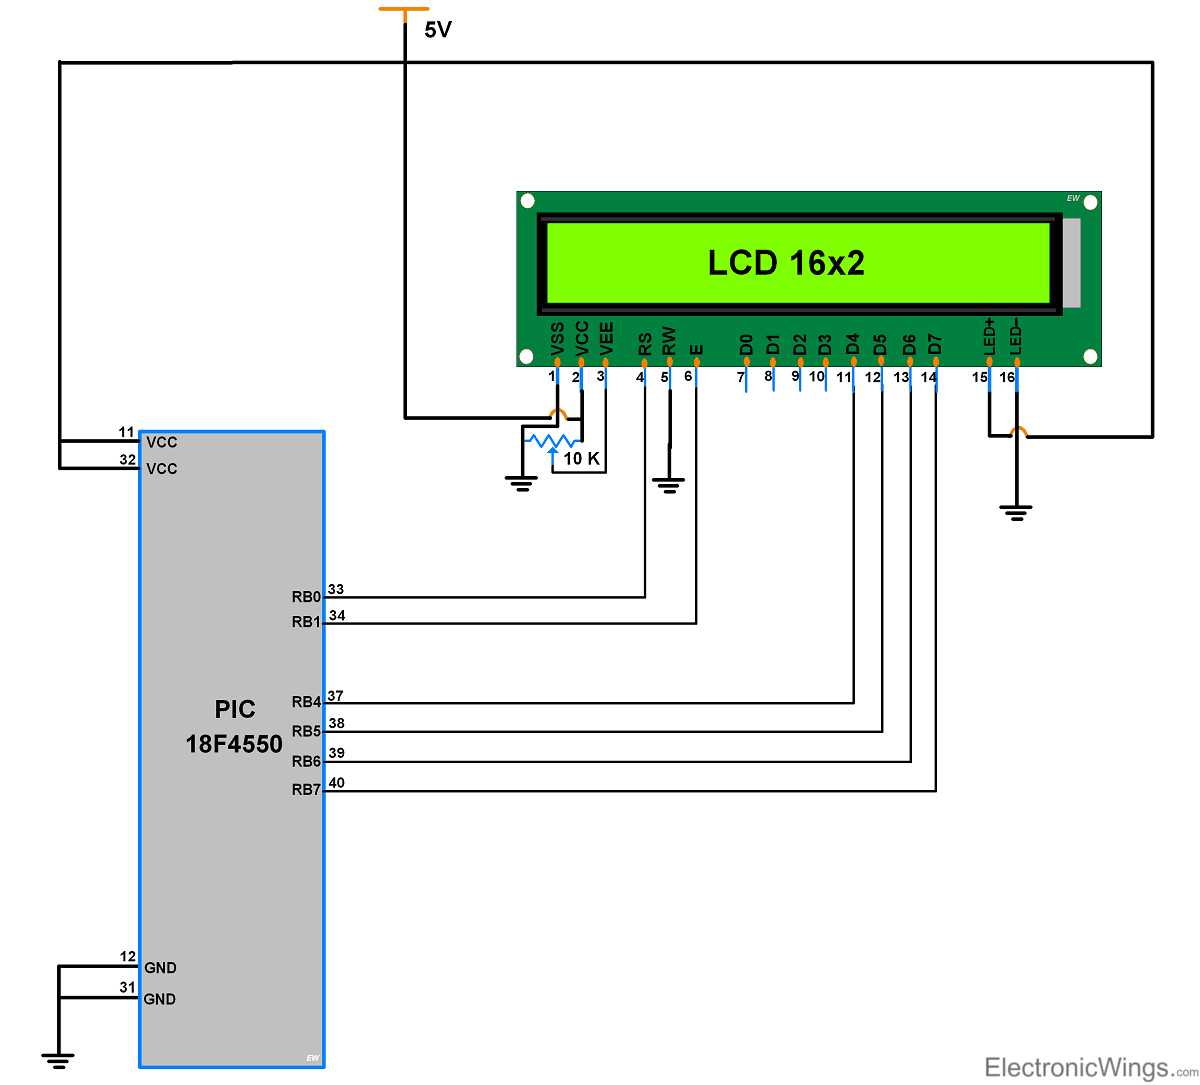 LCD16x2 Interfacing with PIC18F4550